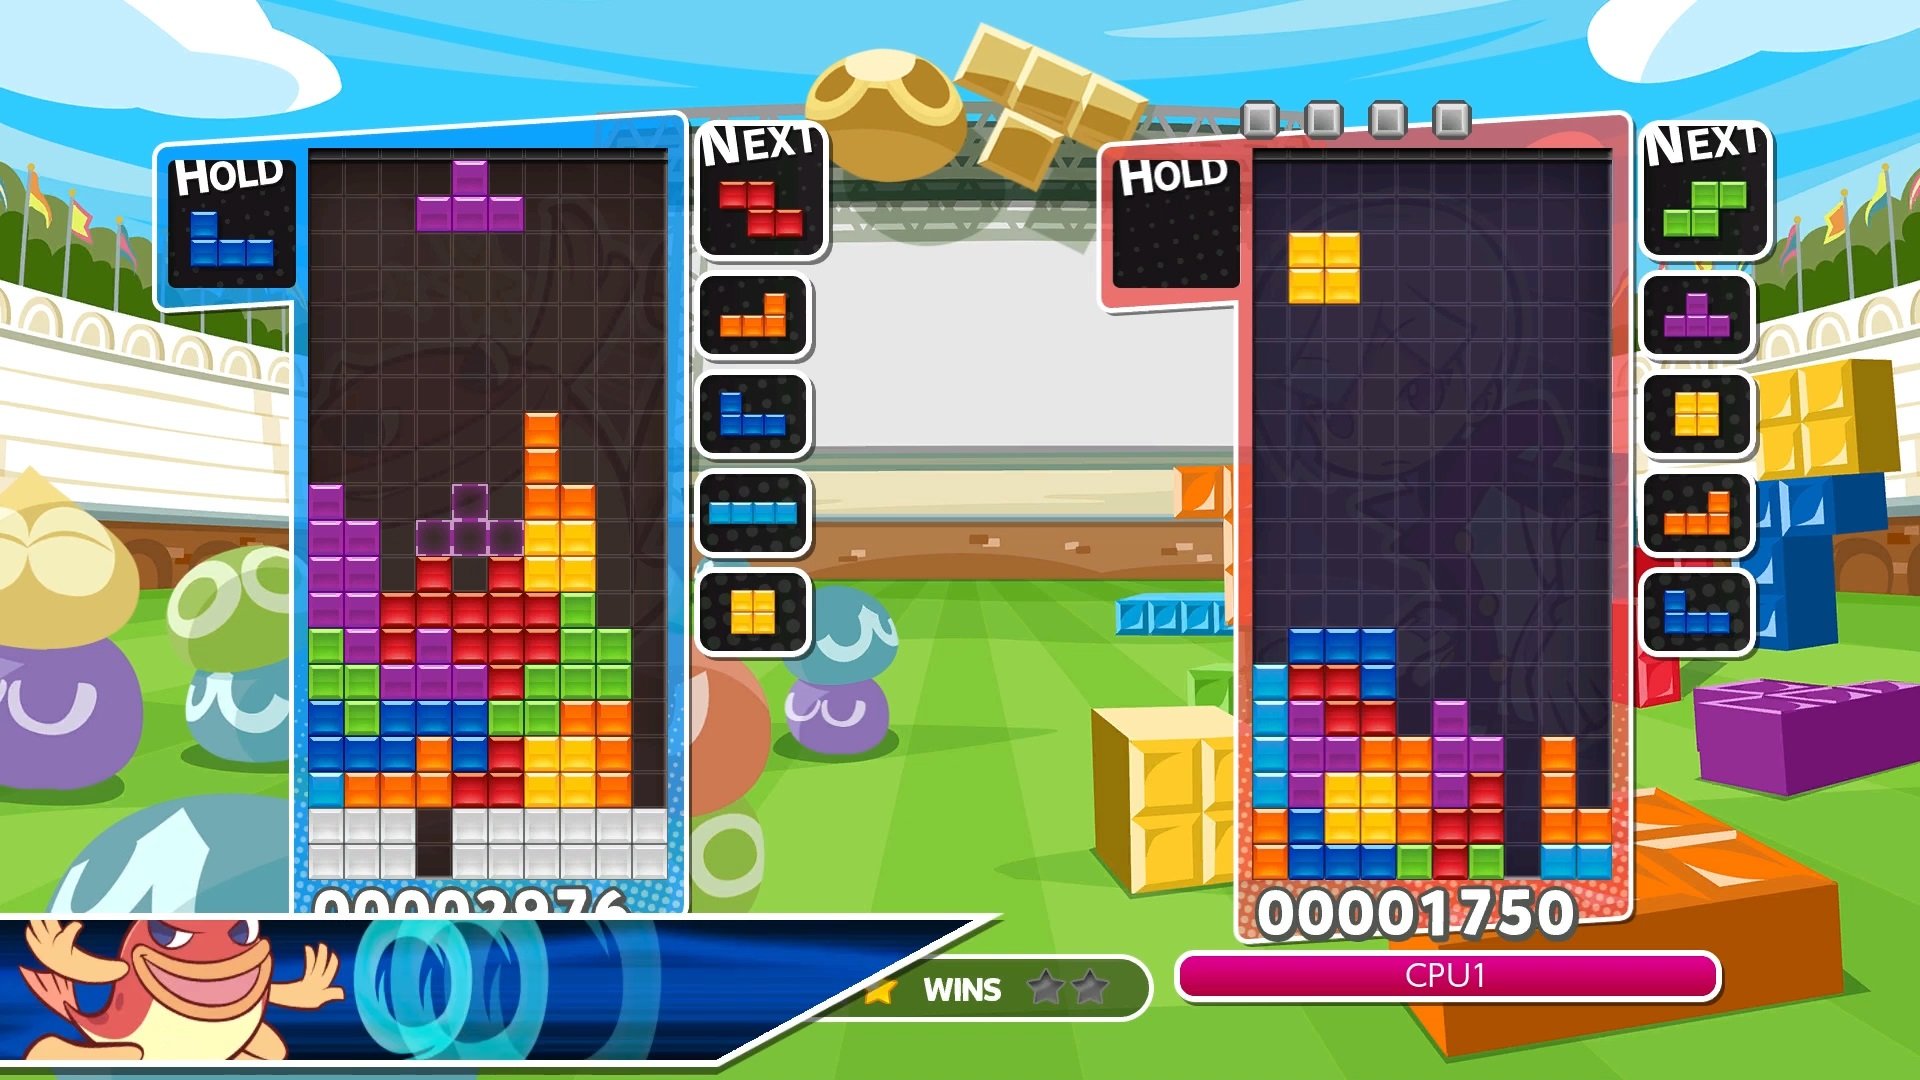 5 Tetris Games You Should Check Out